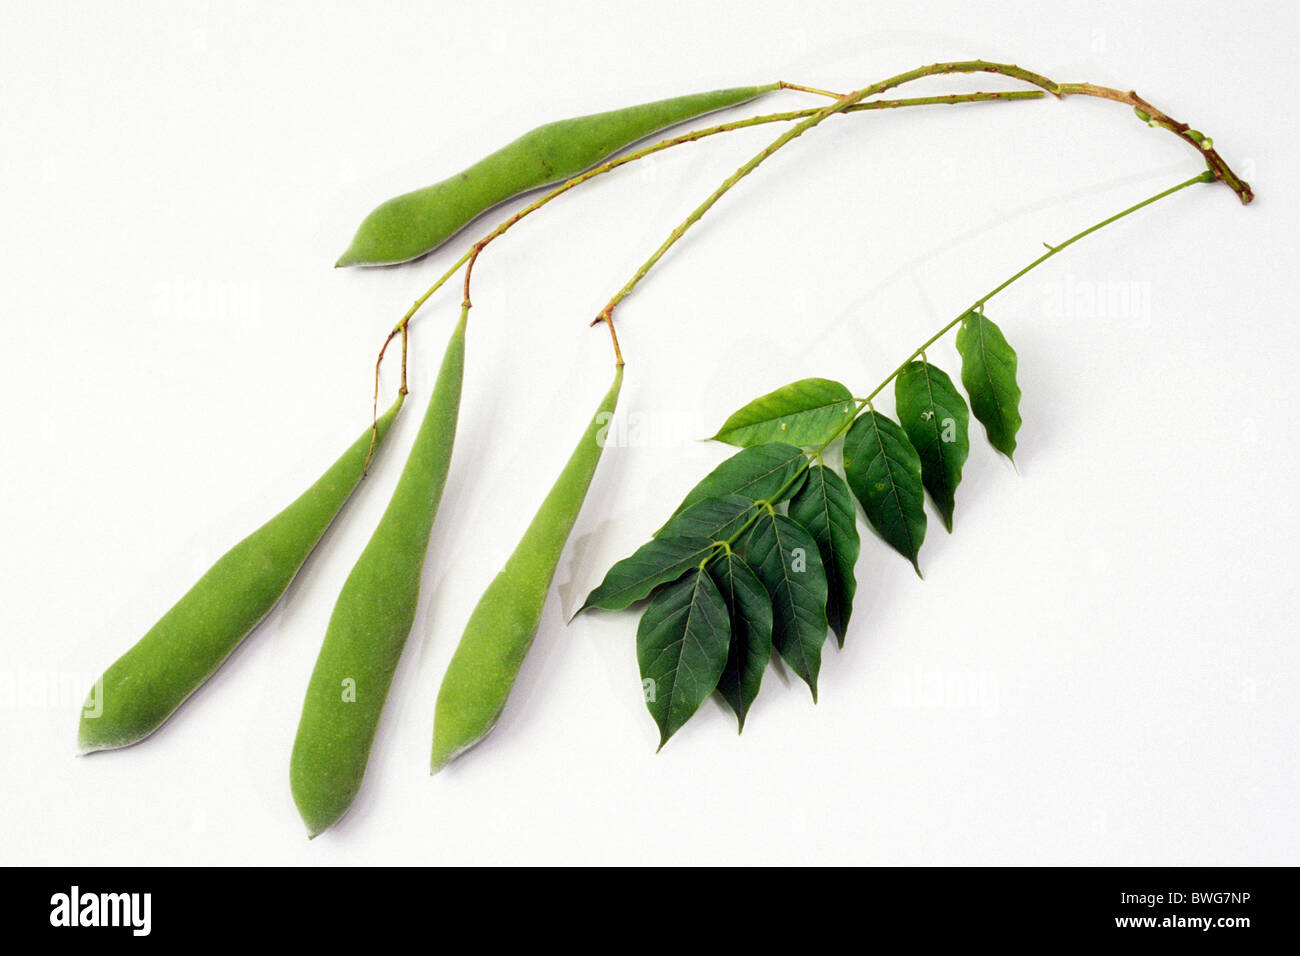 Chinese Wisteria (Wisteria sinensis), pods and leaves, studio picture. Stock Photo